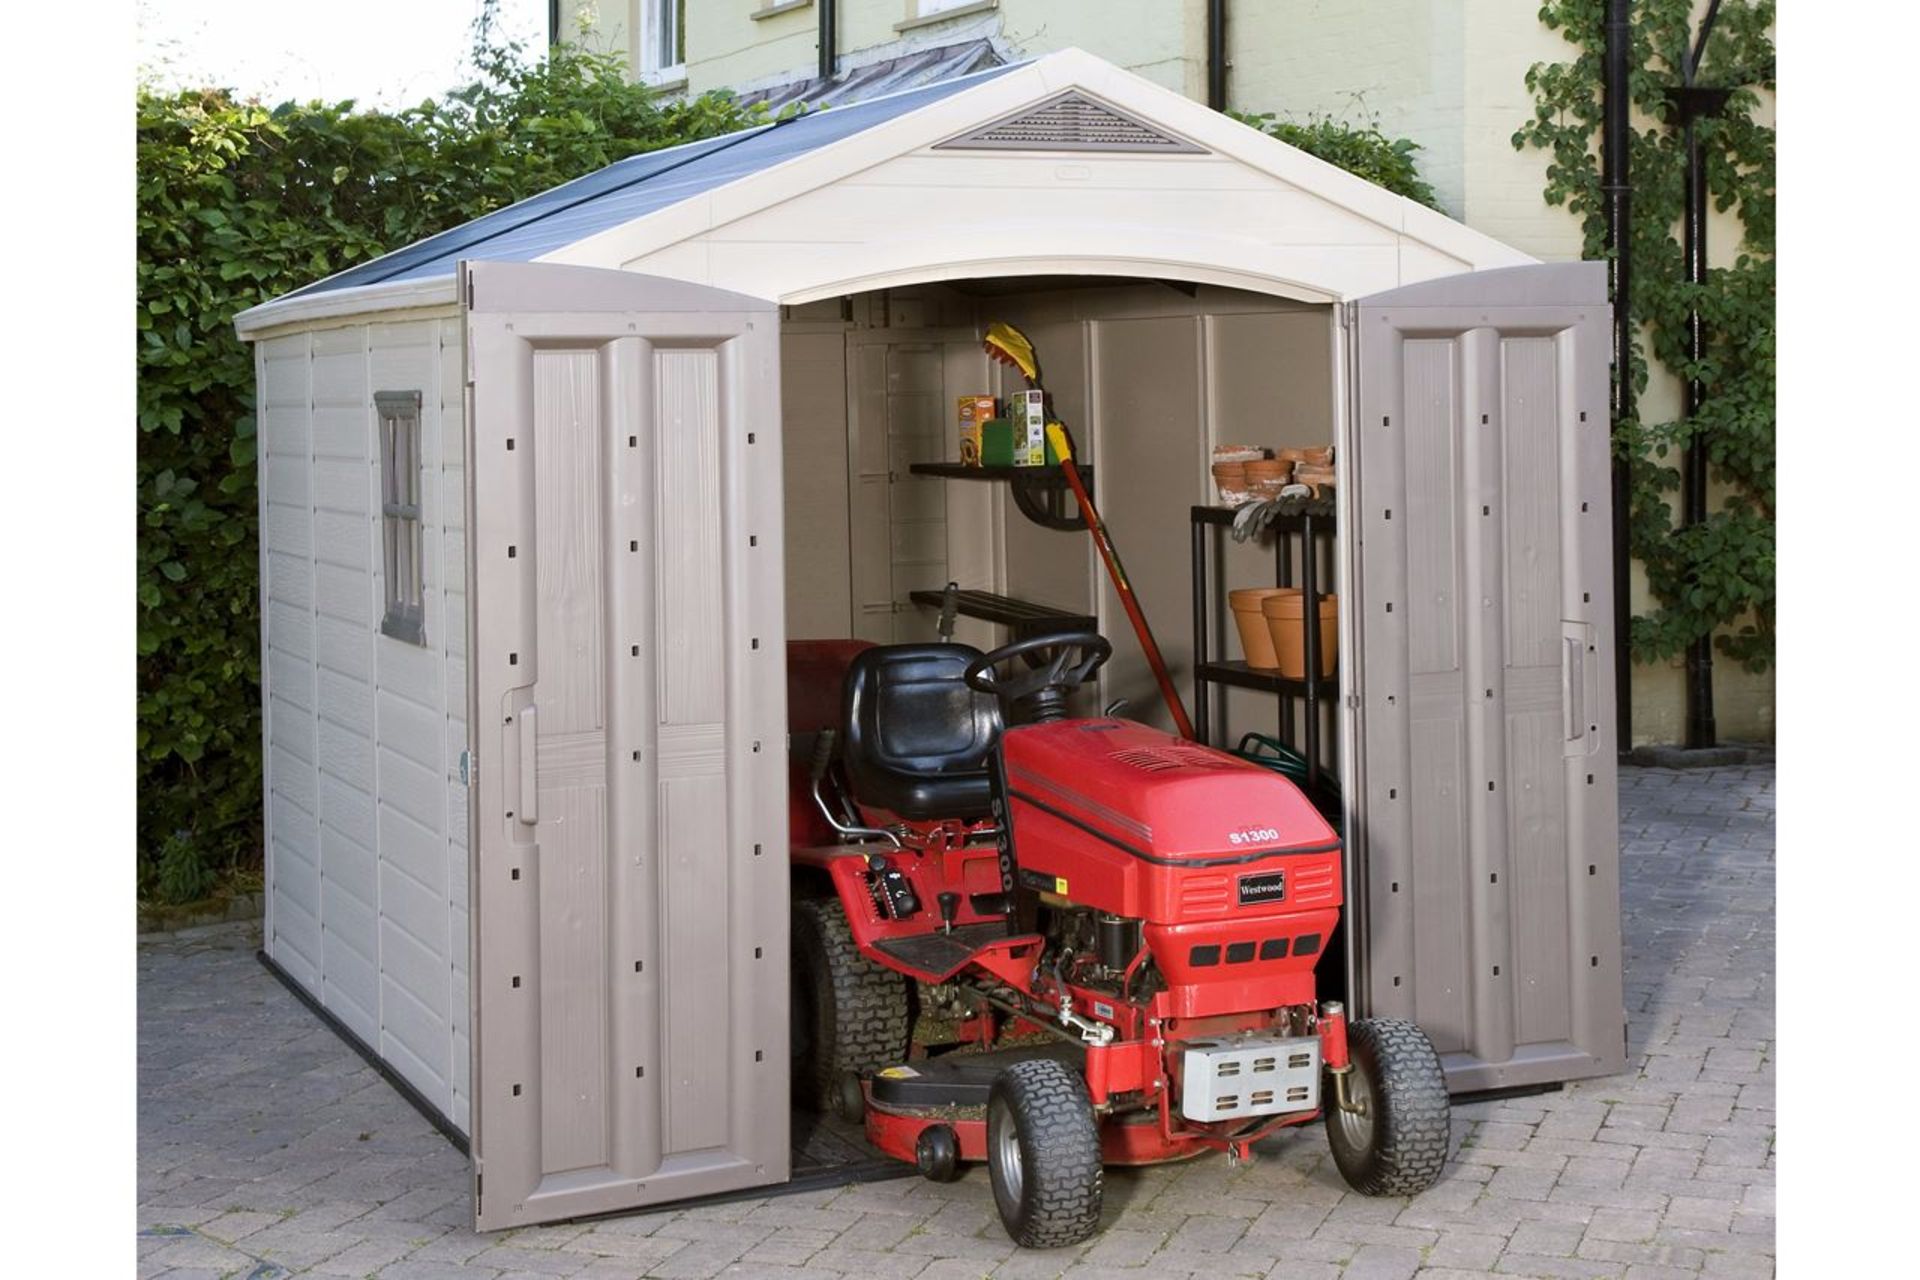 Keter Factor 8 x 11 Shed RRP £899 - Image 5 of 5